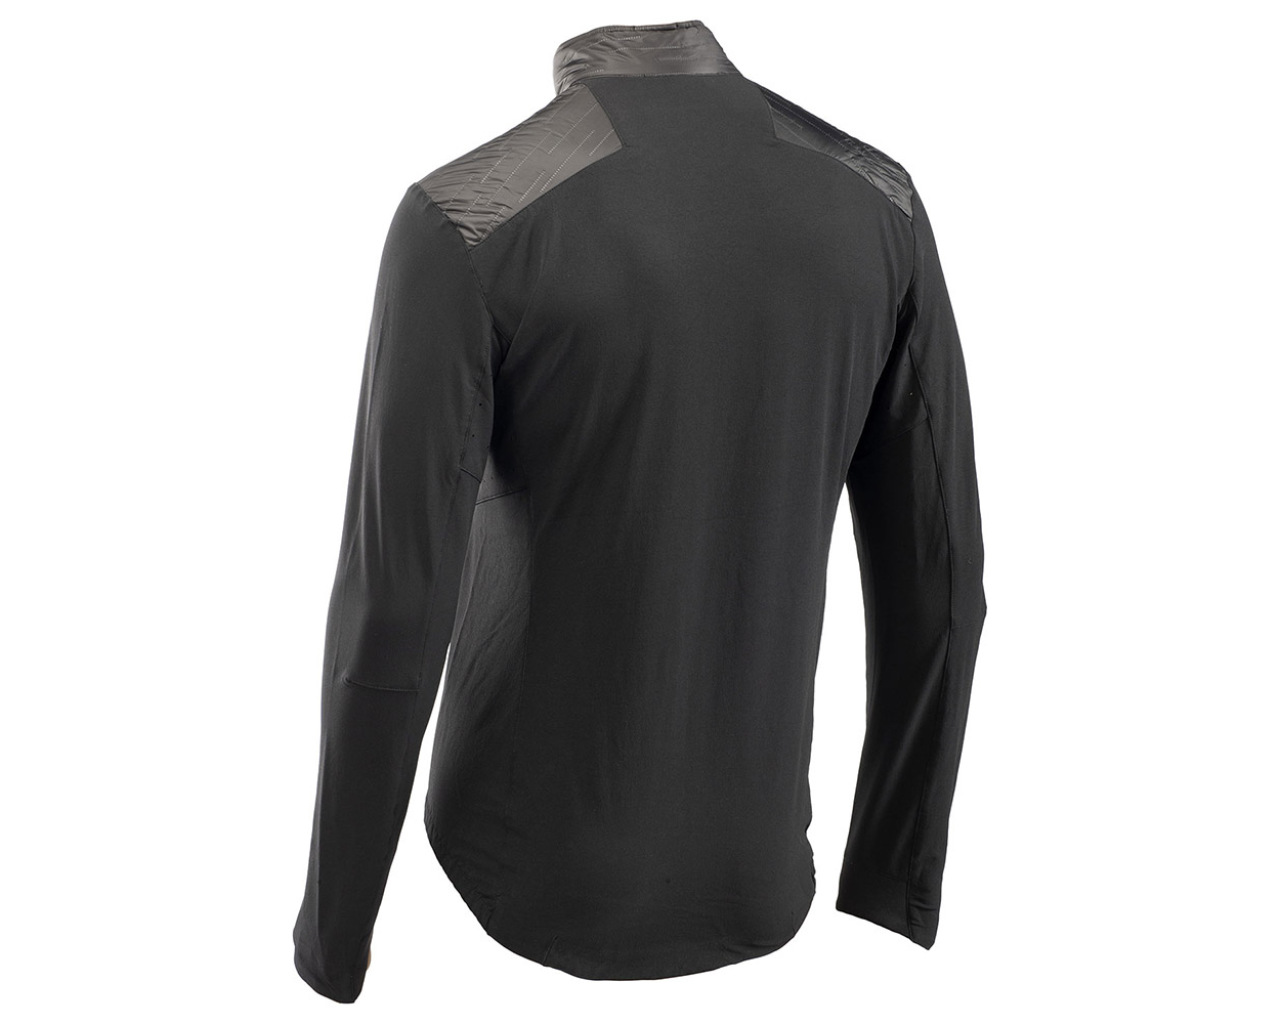 Northwave Extreme Trail Cycling Jacket | Merlin Cycles